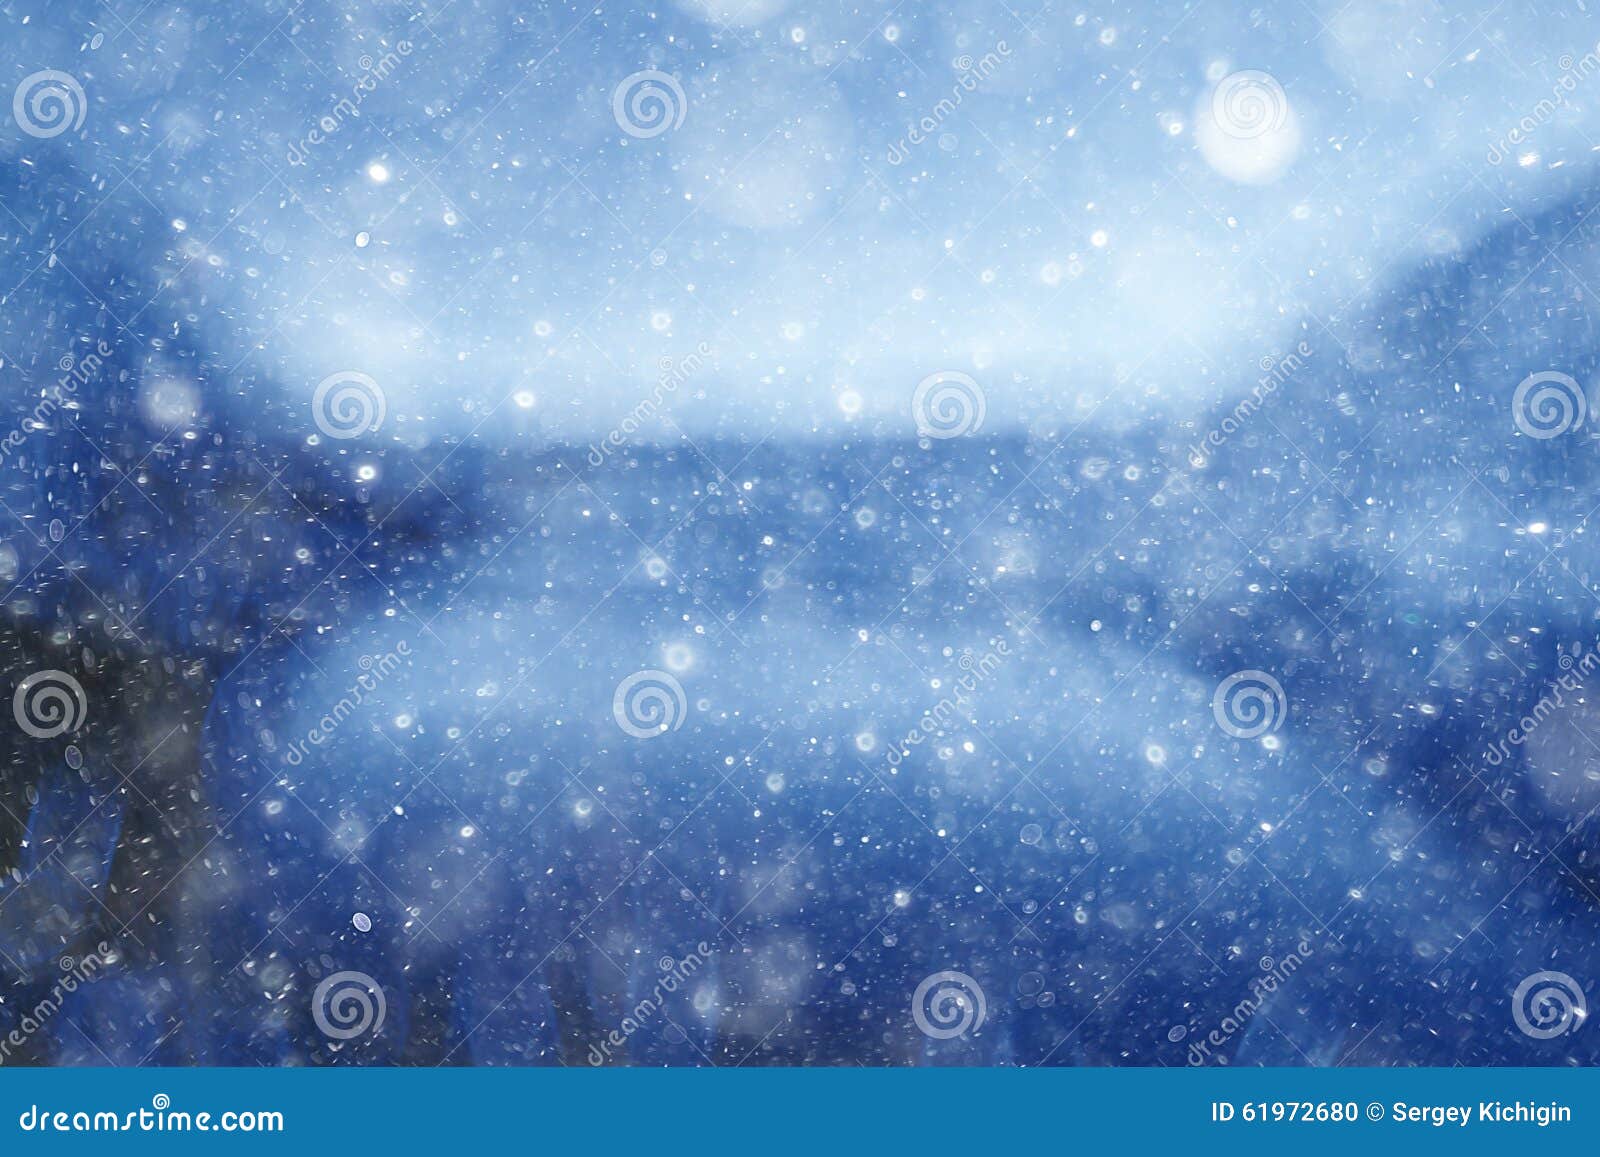 blurry blue background with snow texture